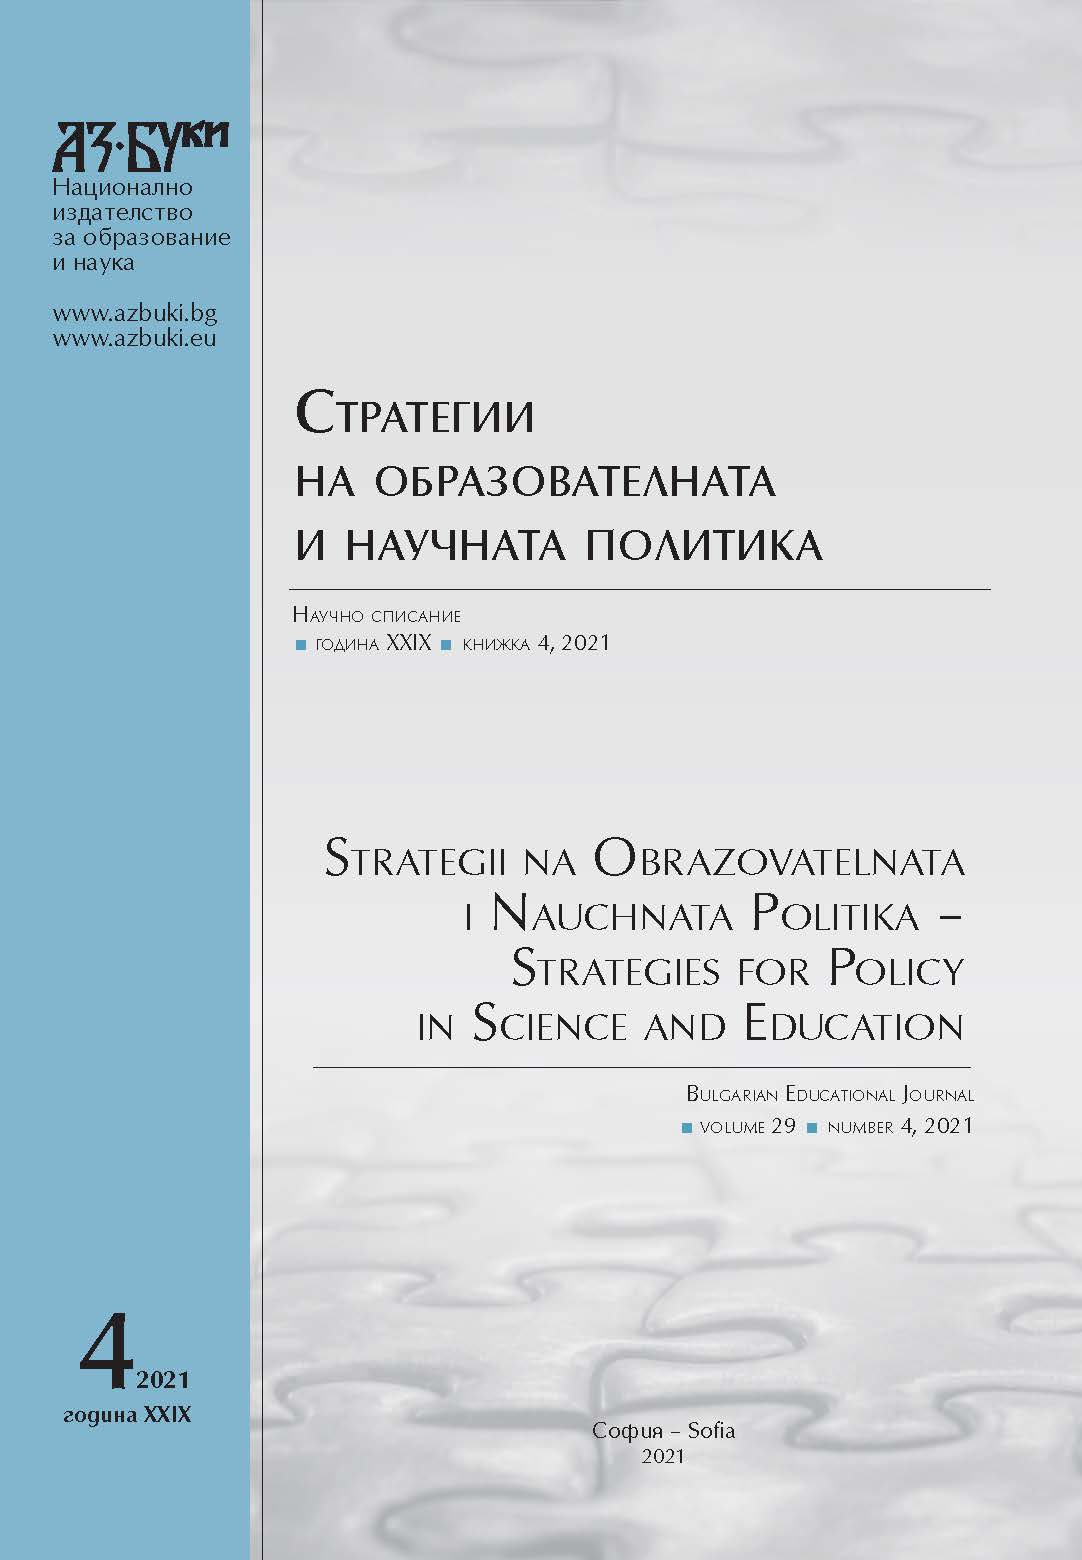 A Book about the History of Bulgarian Higher Engineering Education Cover Image